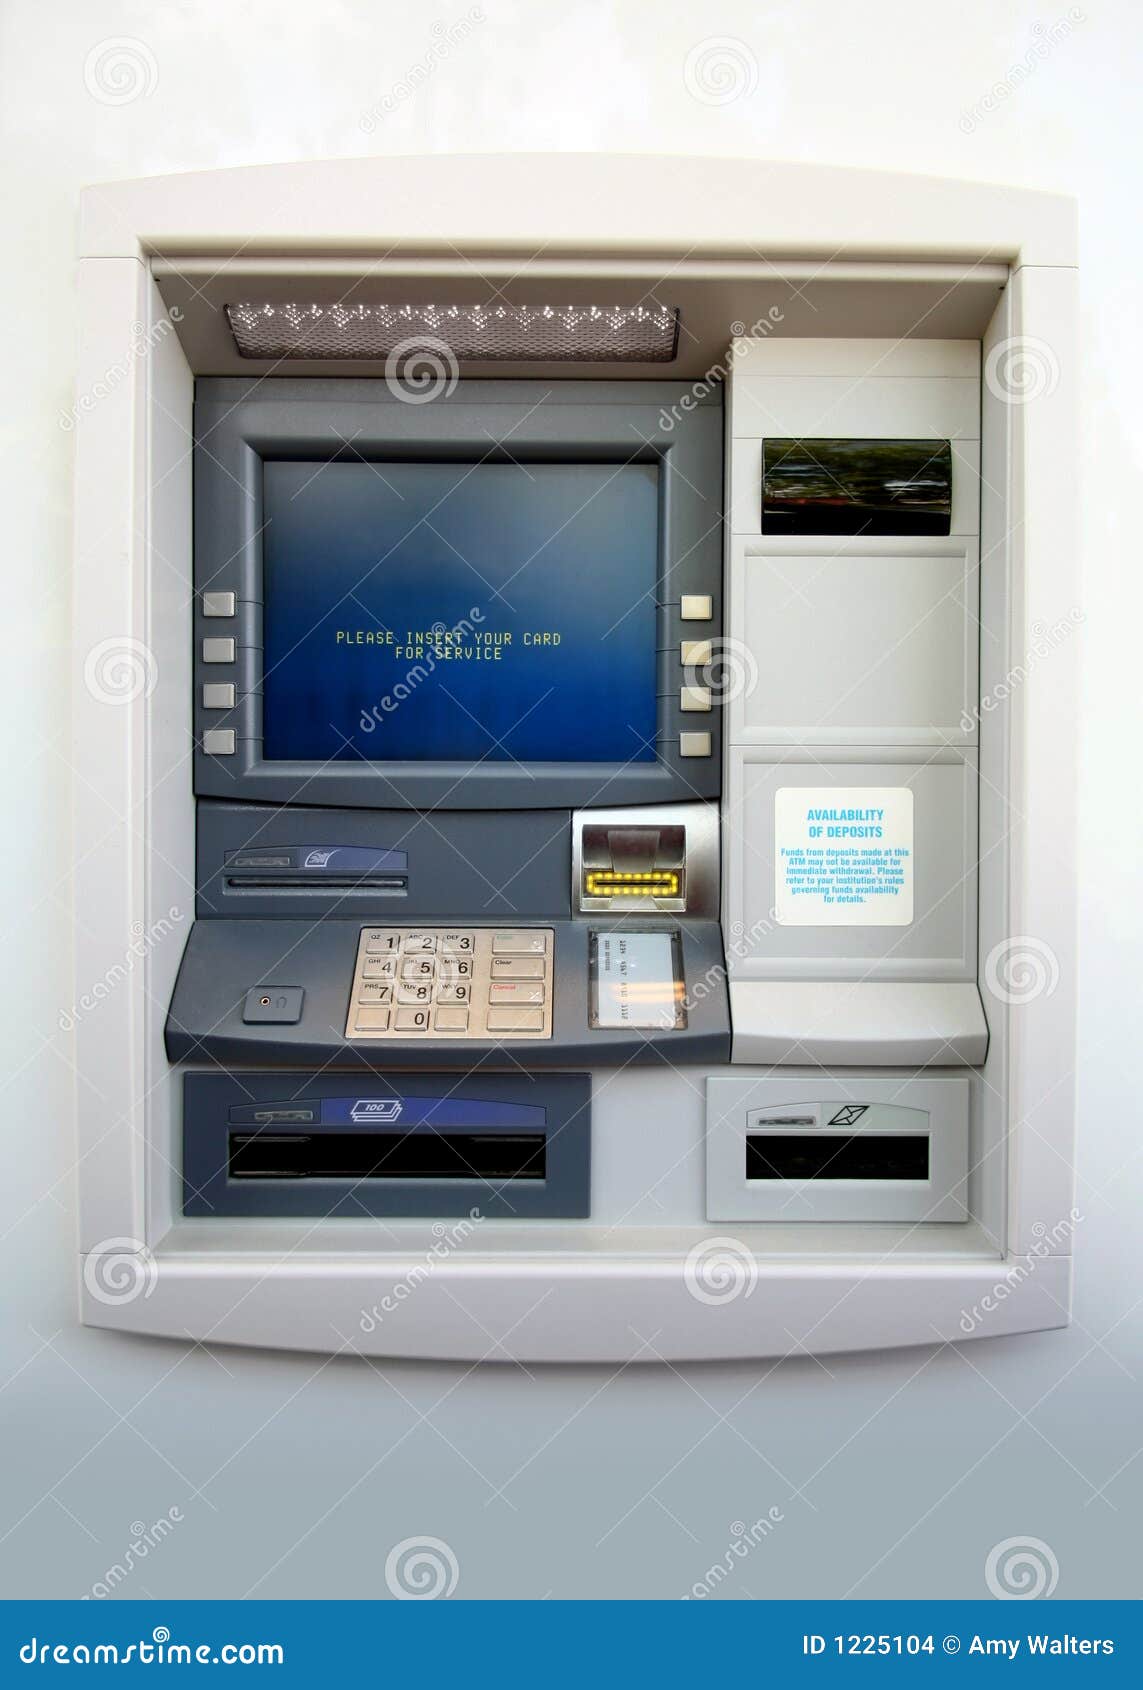 Automated Teller Machine An Electronic Banking Outlet